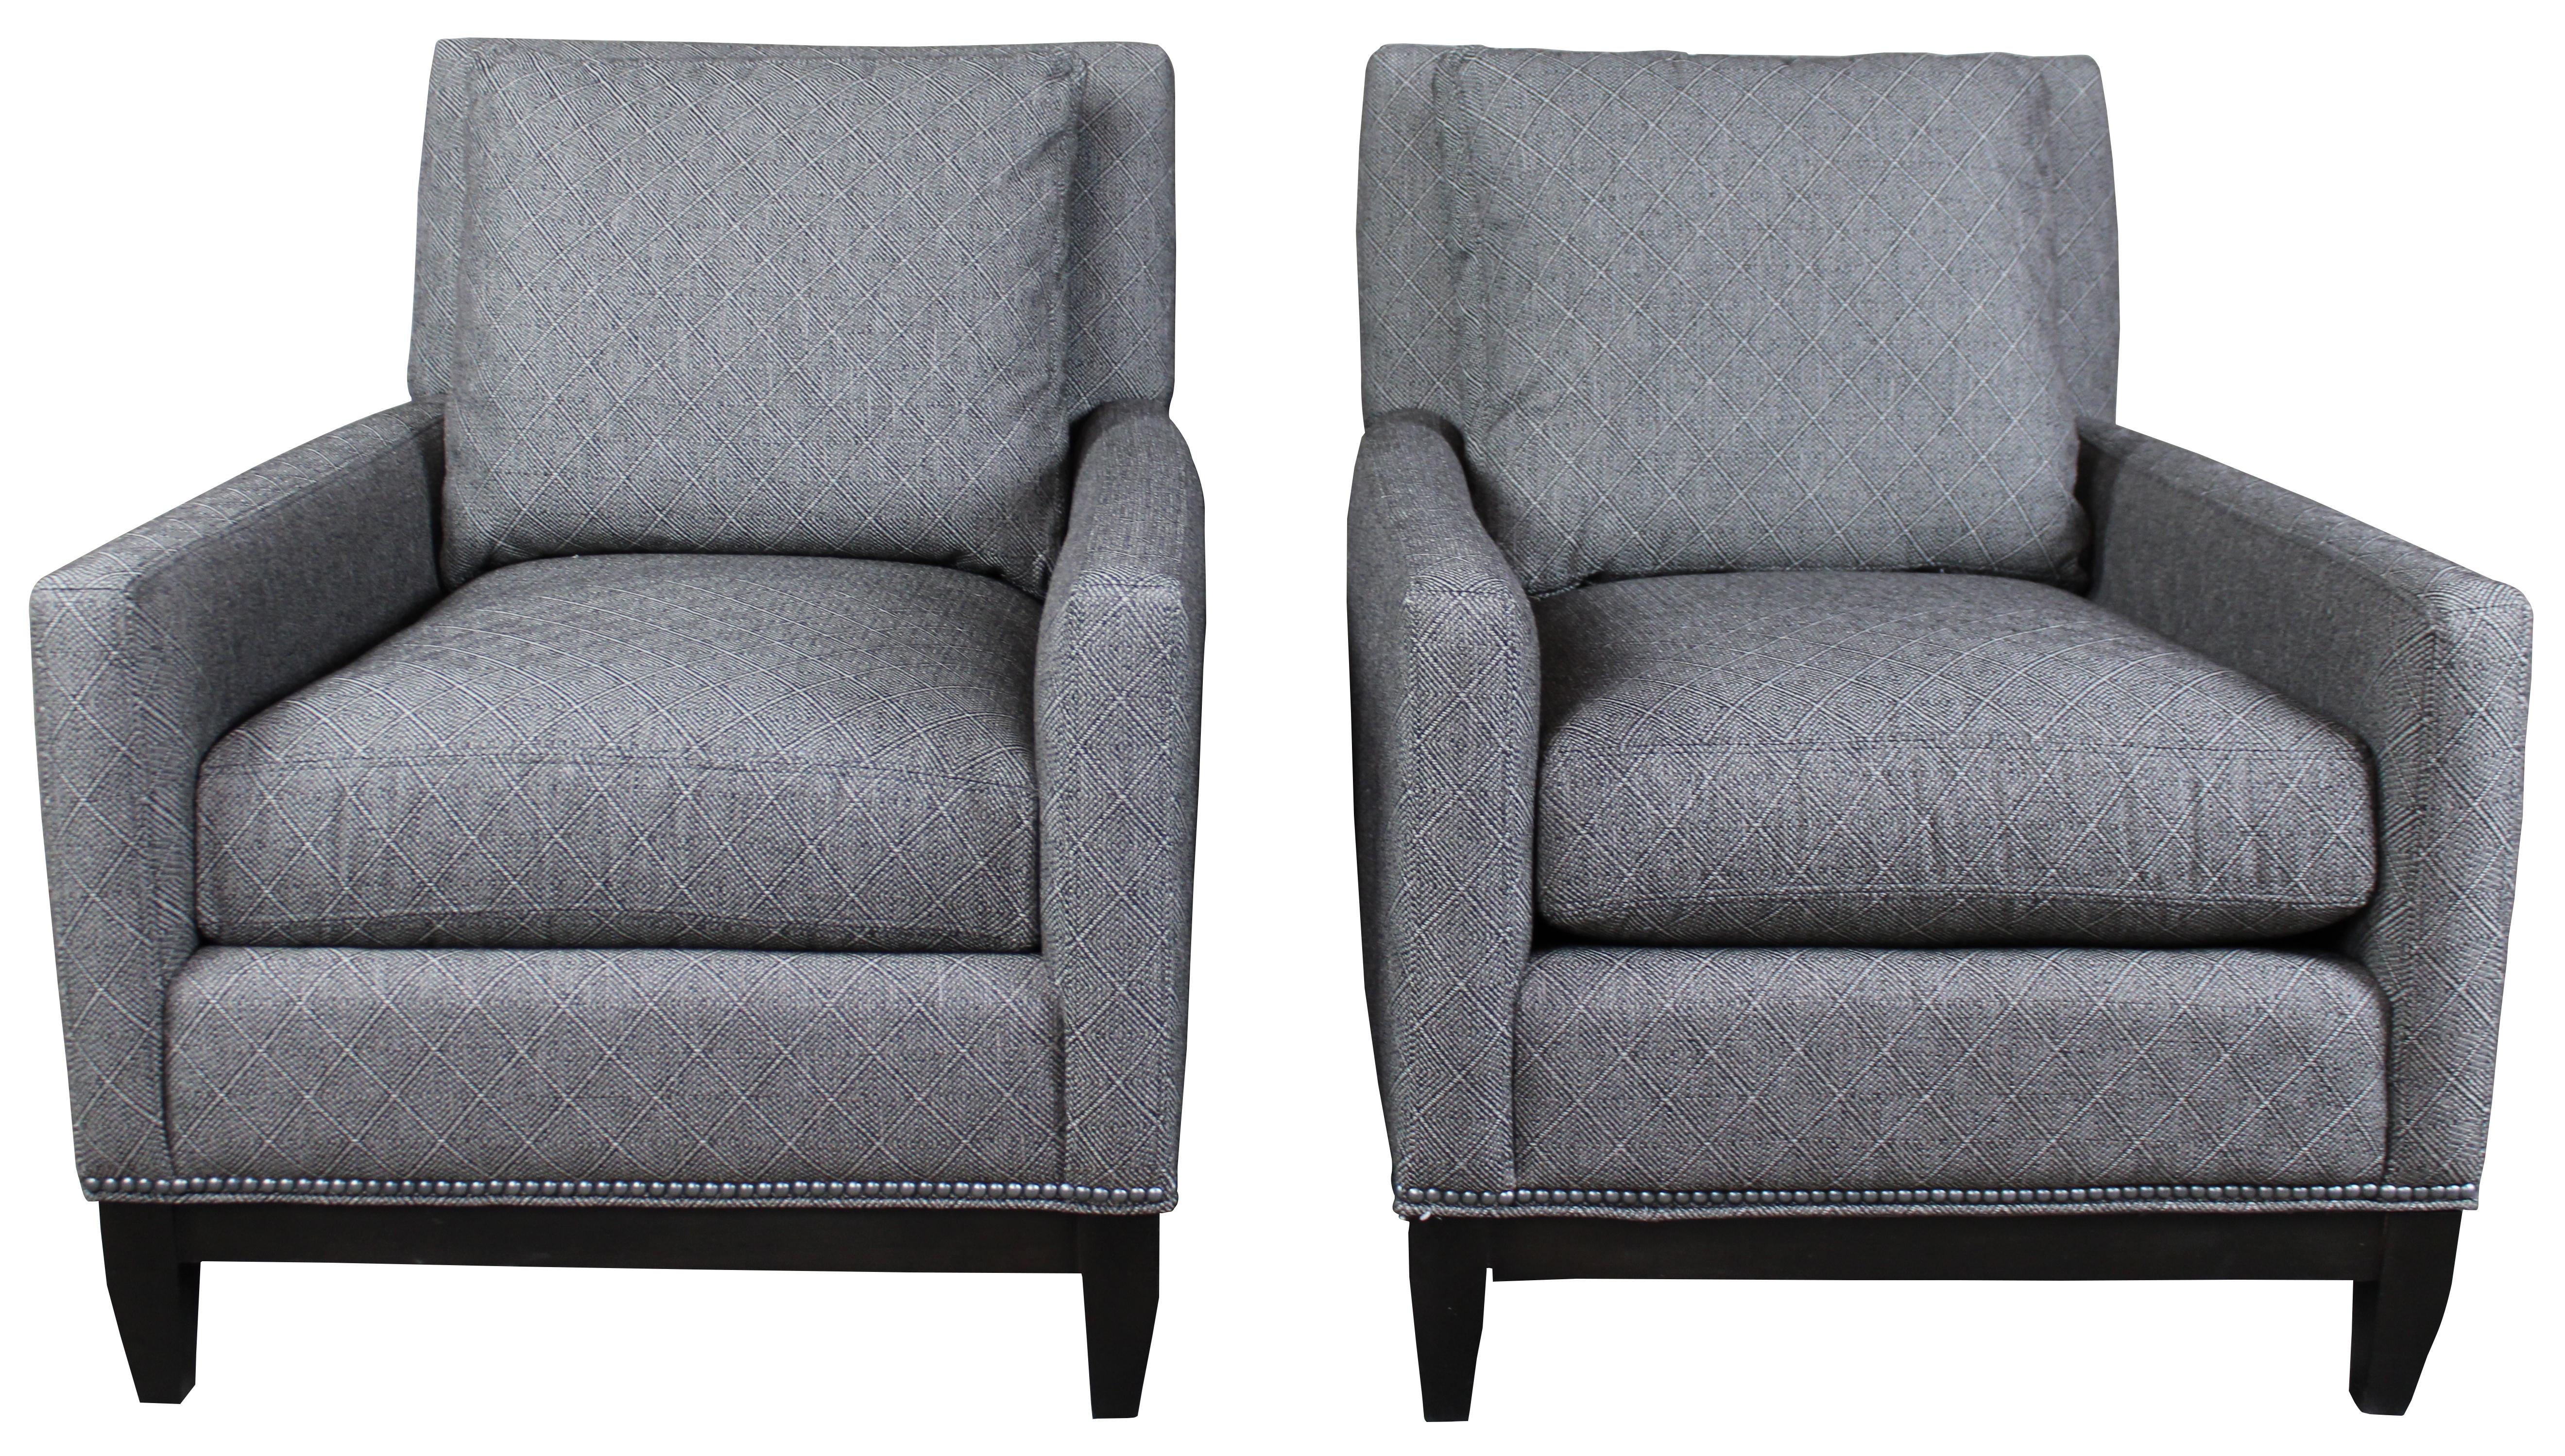 Pair of two Arhaus Furniture Camden Collection armchairs. Features Arhaus's bench crafted upholstery, a gray tweed style fabric with a geometric repeating pattern, accented with nailhead trim and tapered feet.
   